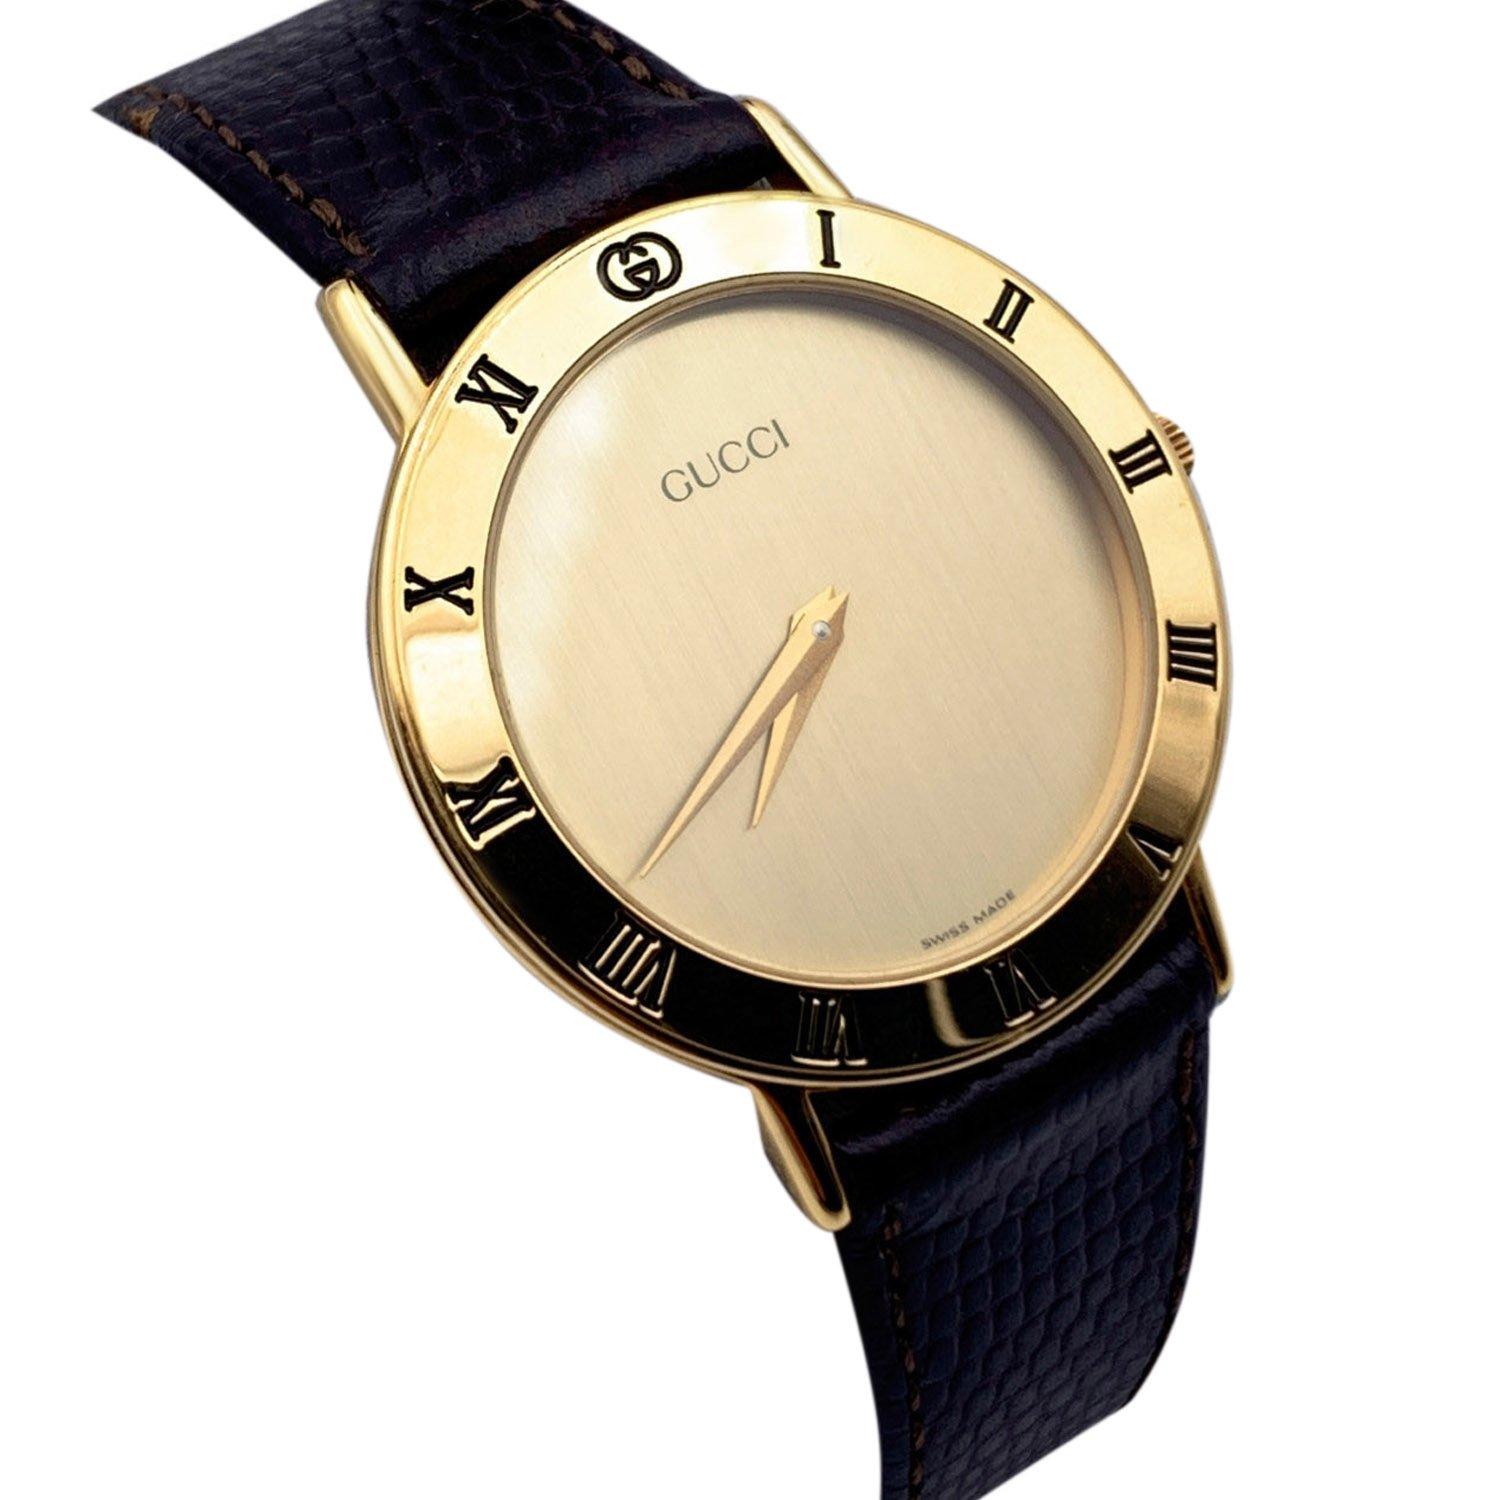 Beautiful vintage wristwatch by GUCCI. Round gold metal stainless steel case. Gold dial. Swiss Made Quartz Movement. Brown leather wrist strap with 6 holes adjustment. GG - GUCCI buckle. Roman numbers engraved on the bezel. 'GUCCI' lettering on the